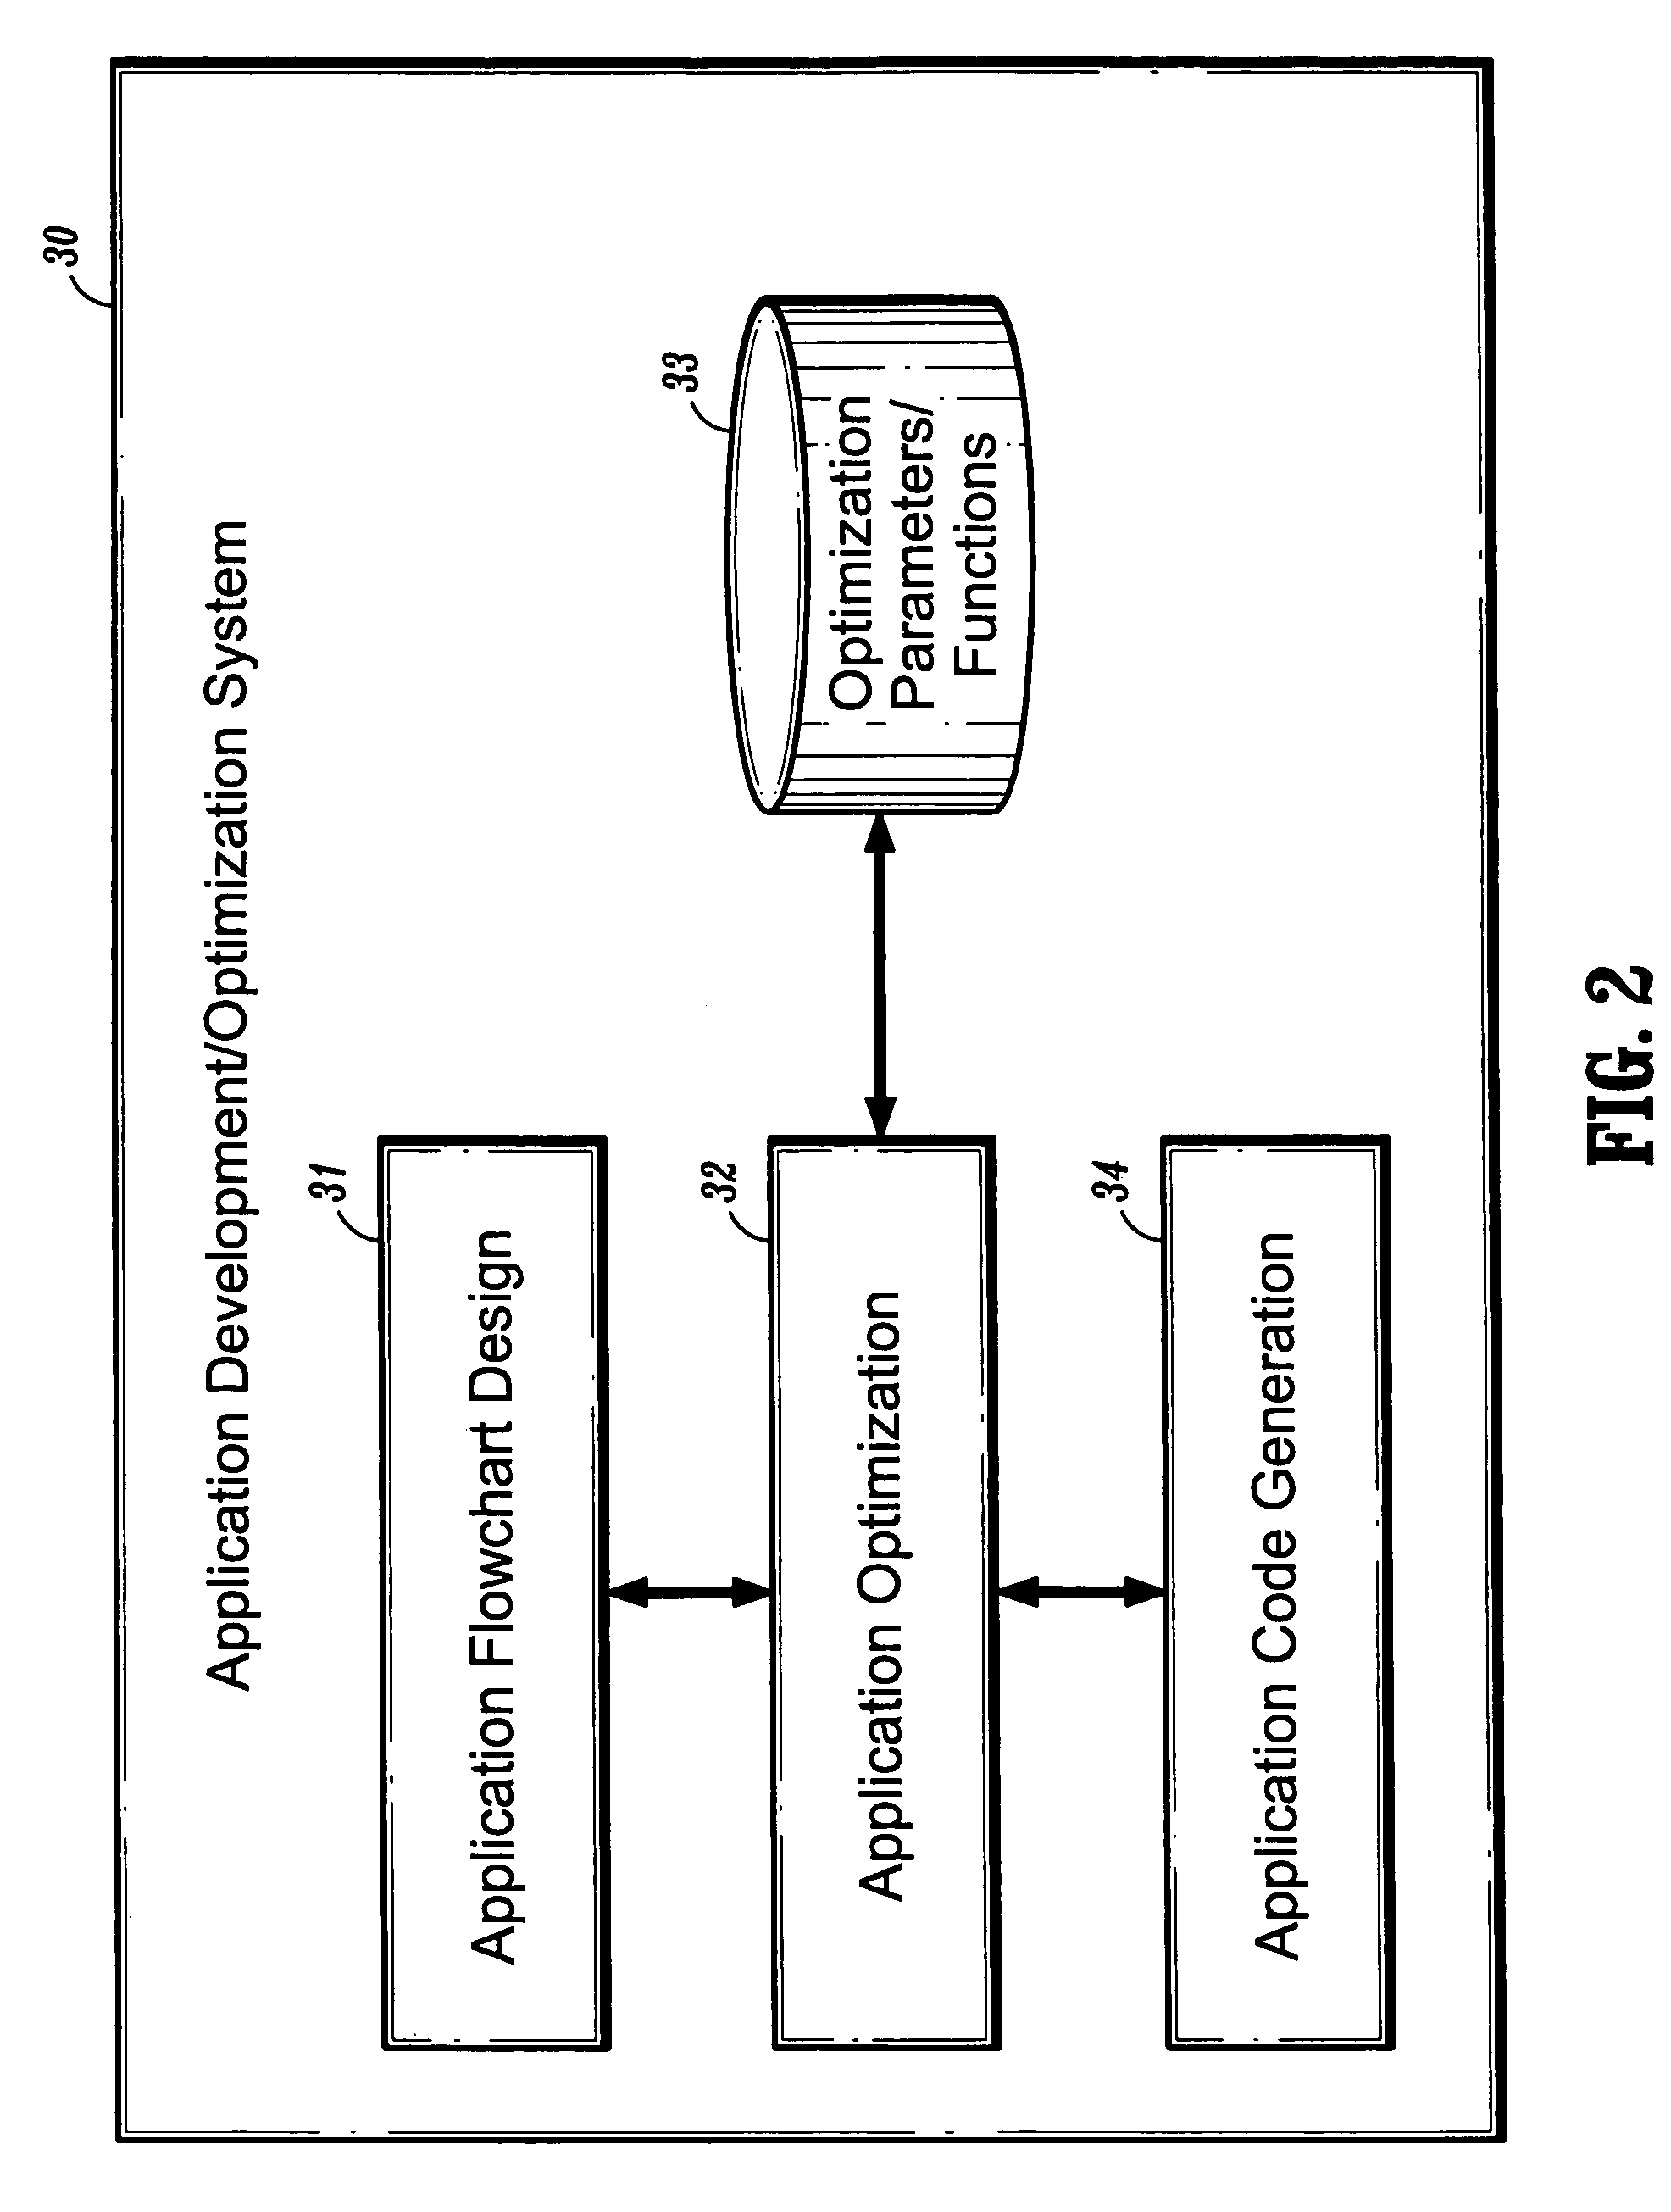 Systems and methods for generating applications that are automatically optimized for network performance